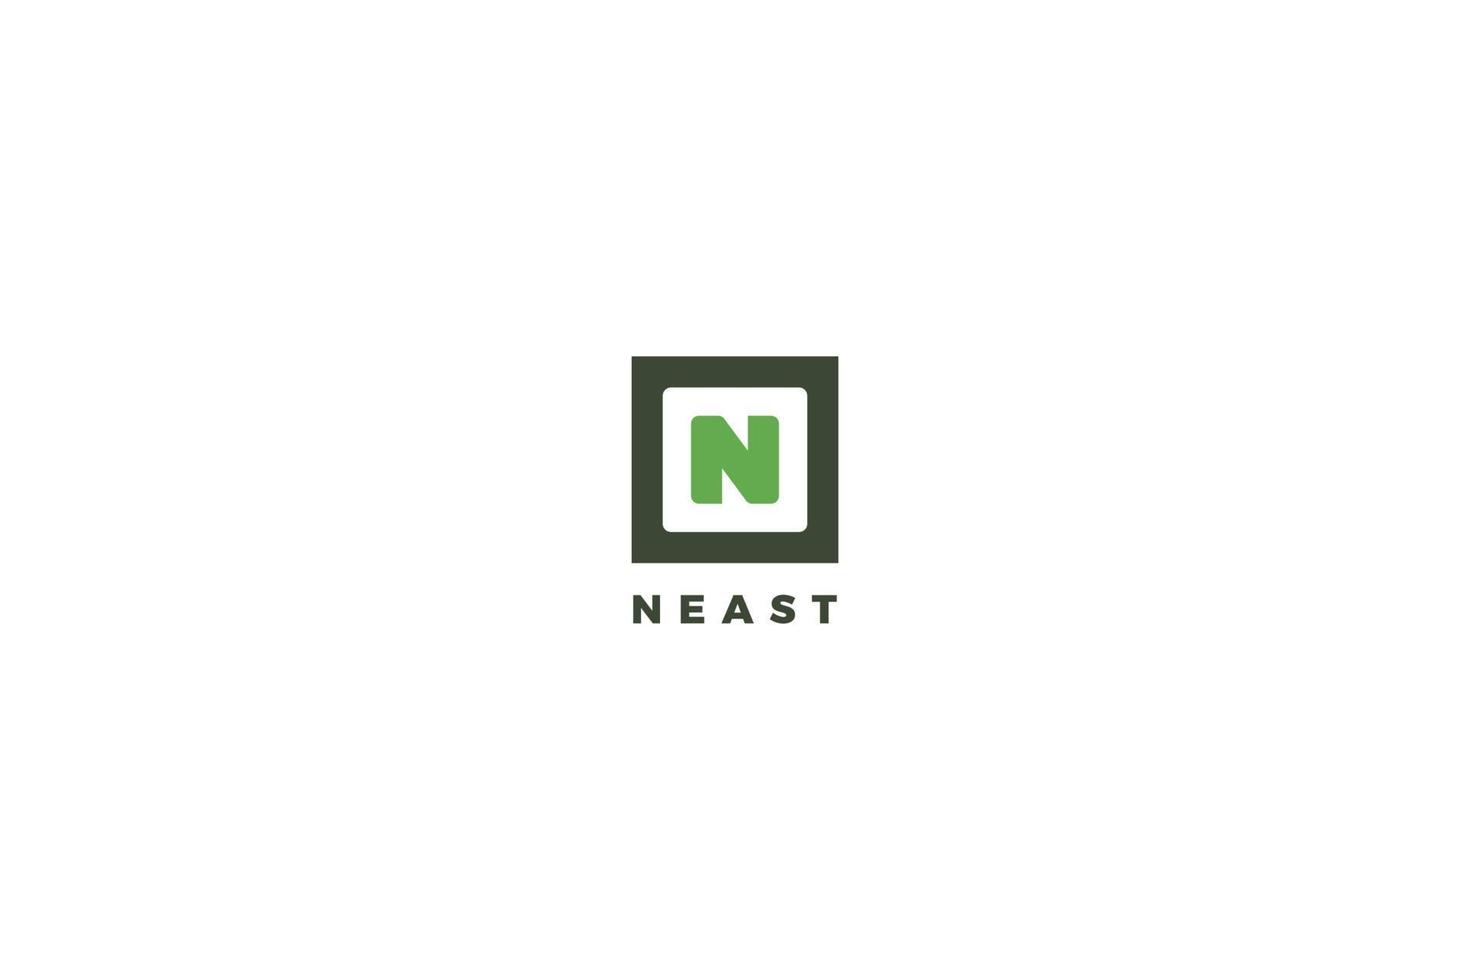 Letter n green button vector